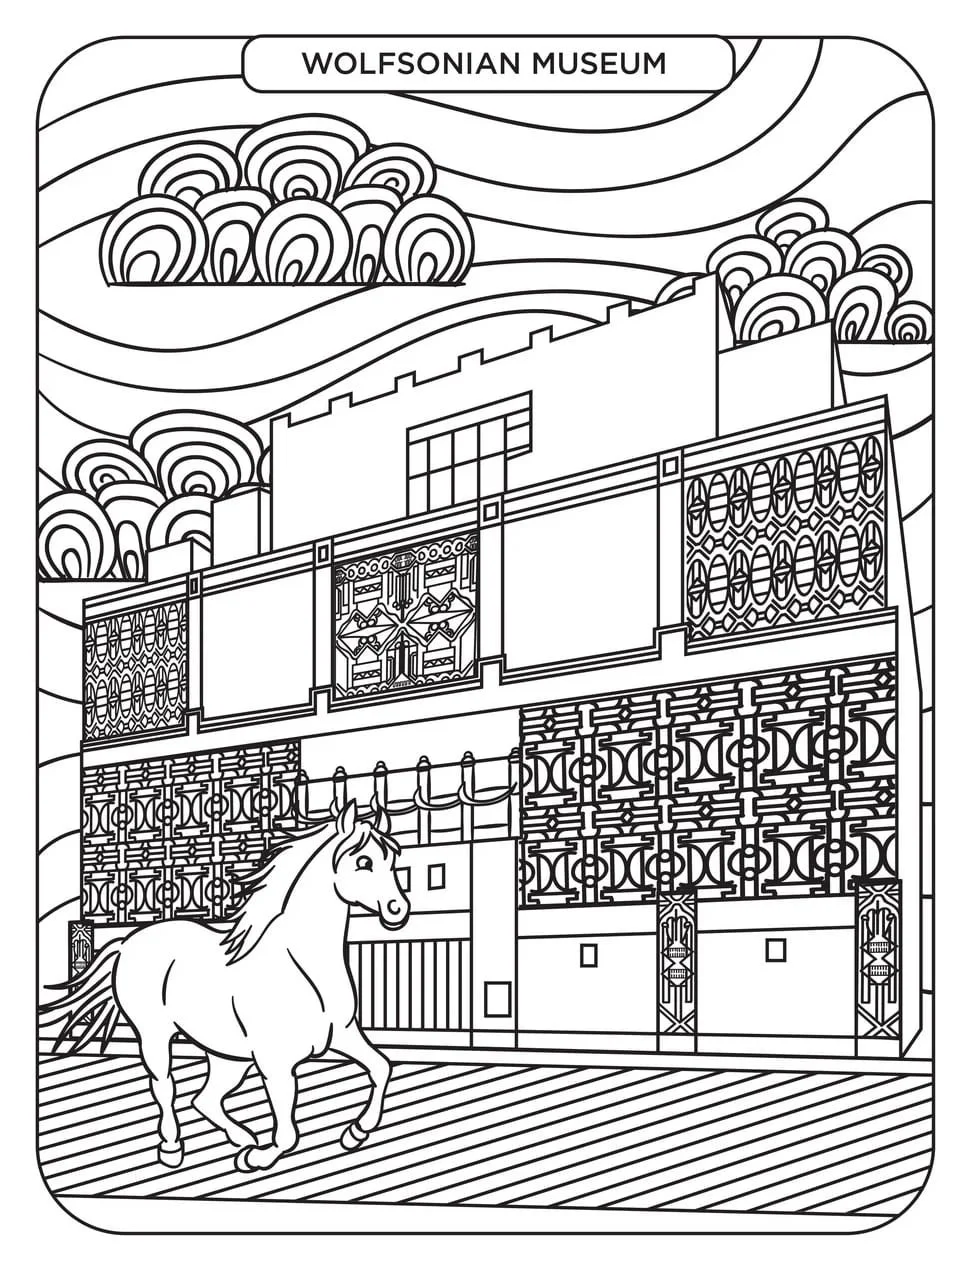 Florida Coloring Pages